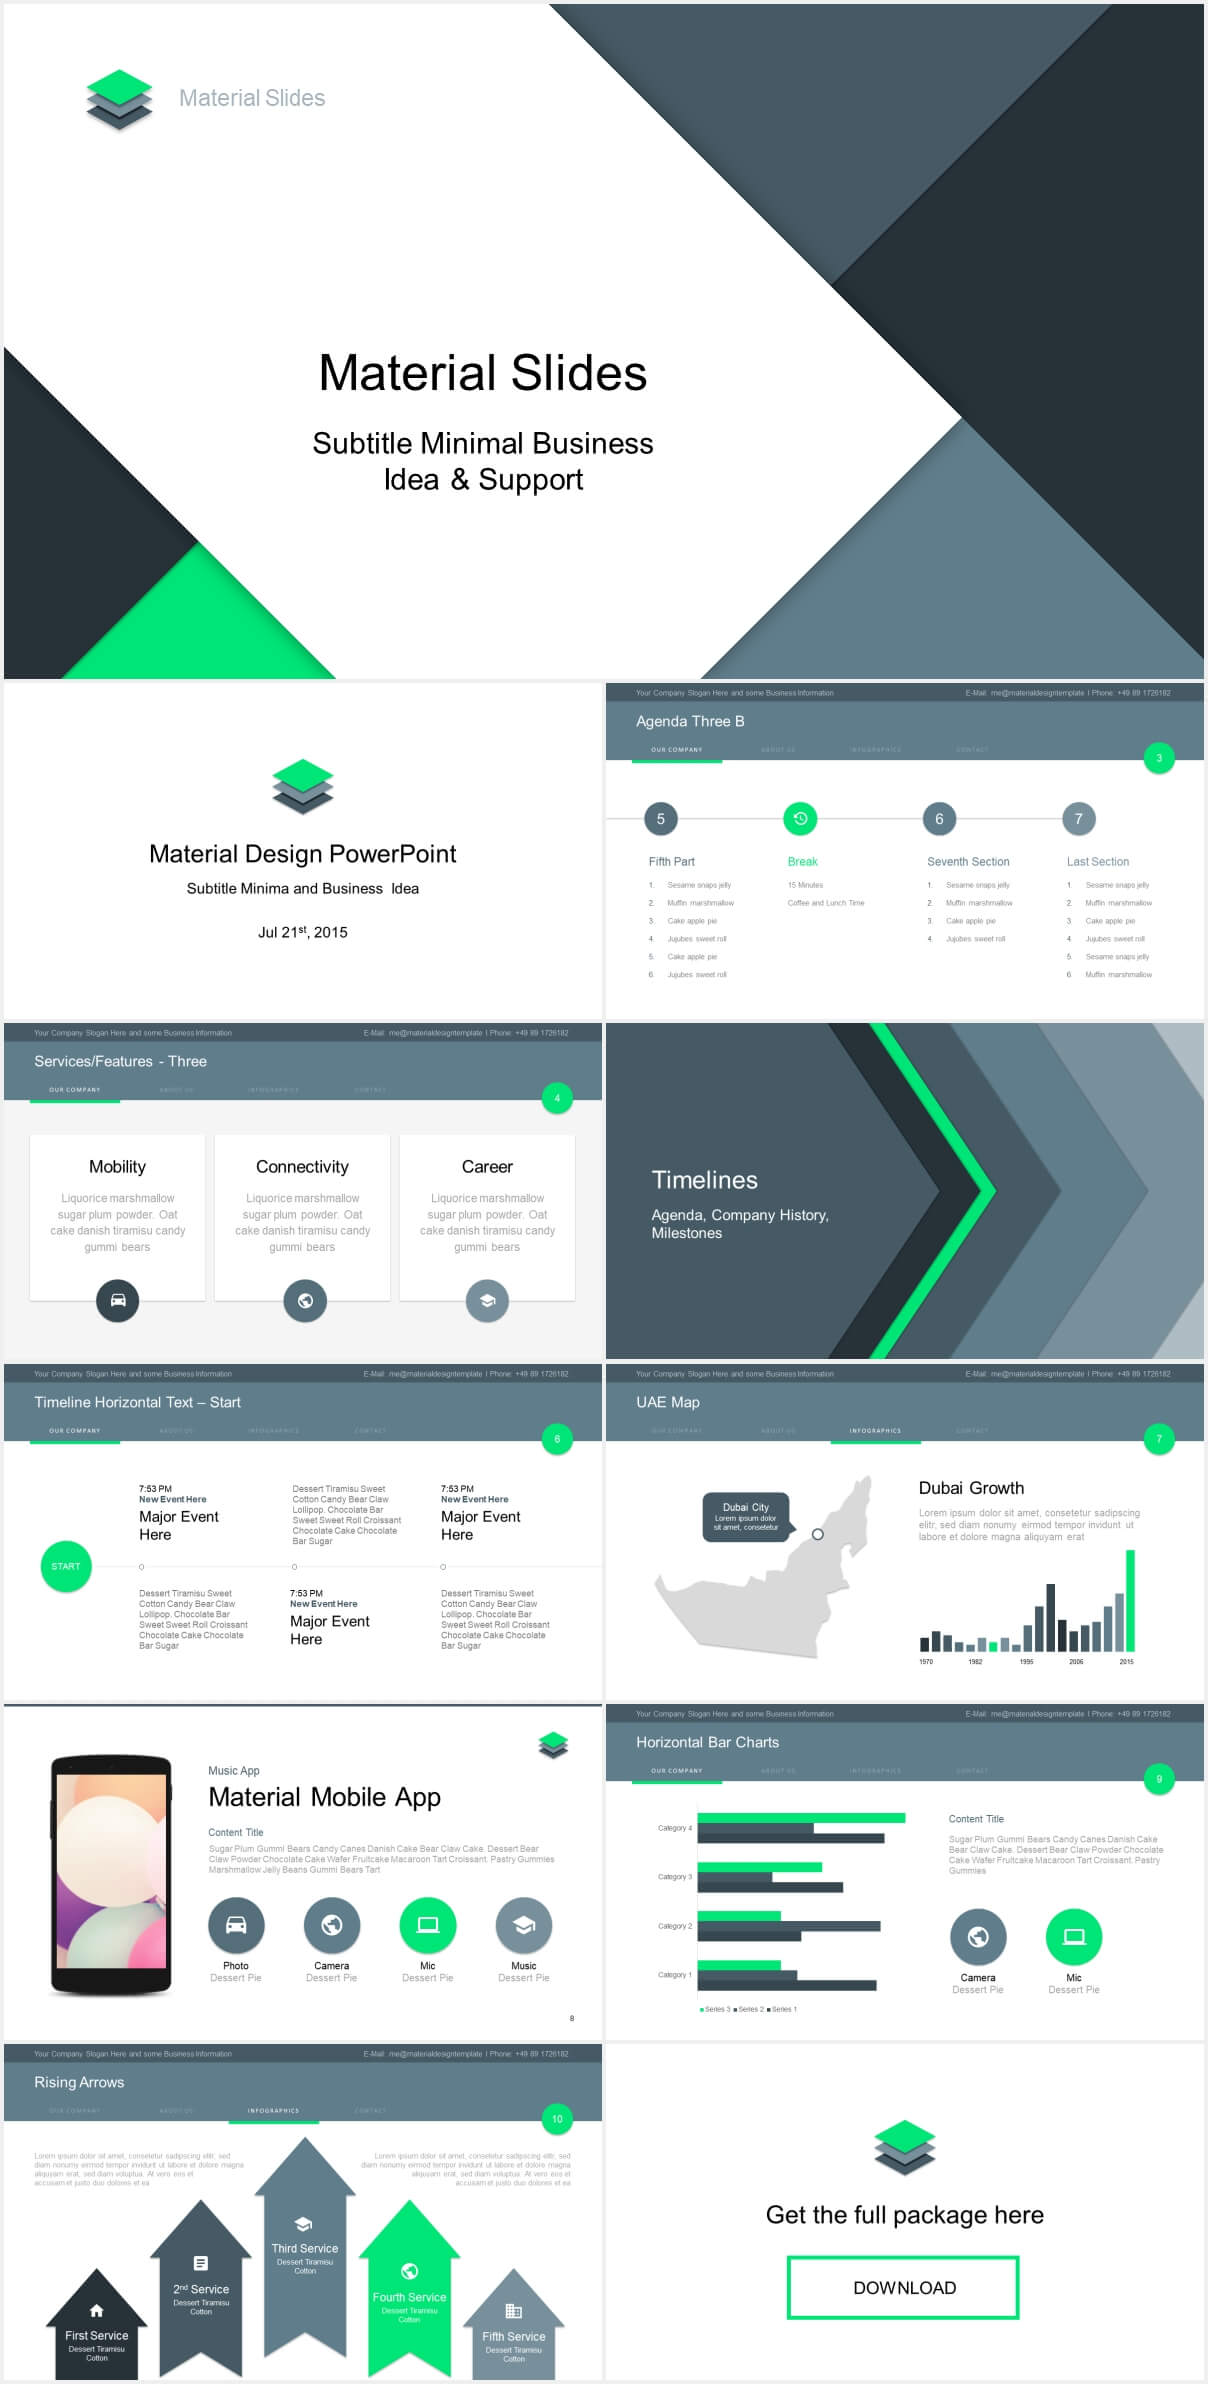 Material Design Powerpoint Template – Just Free Slides In How To Design A Powerpoint Template